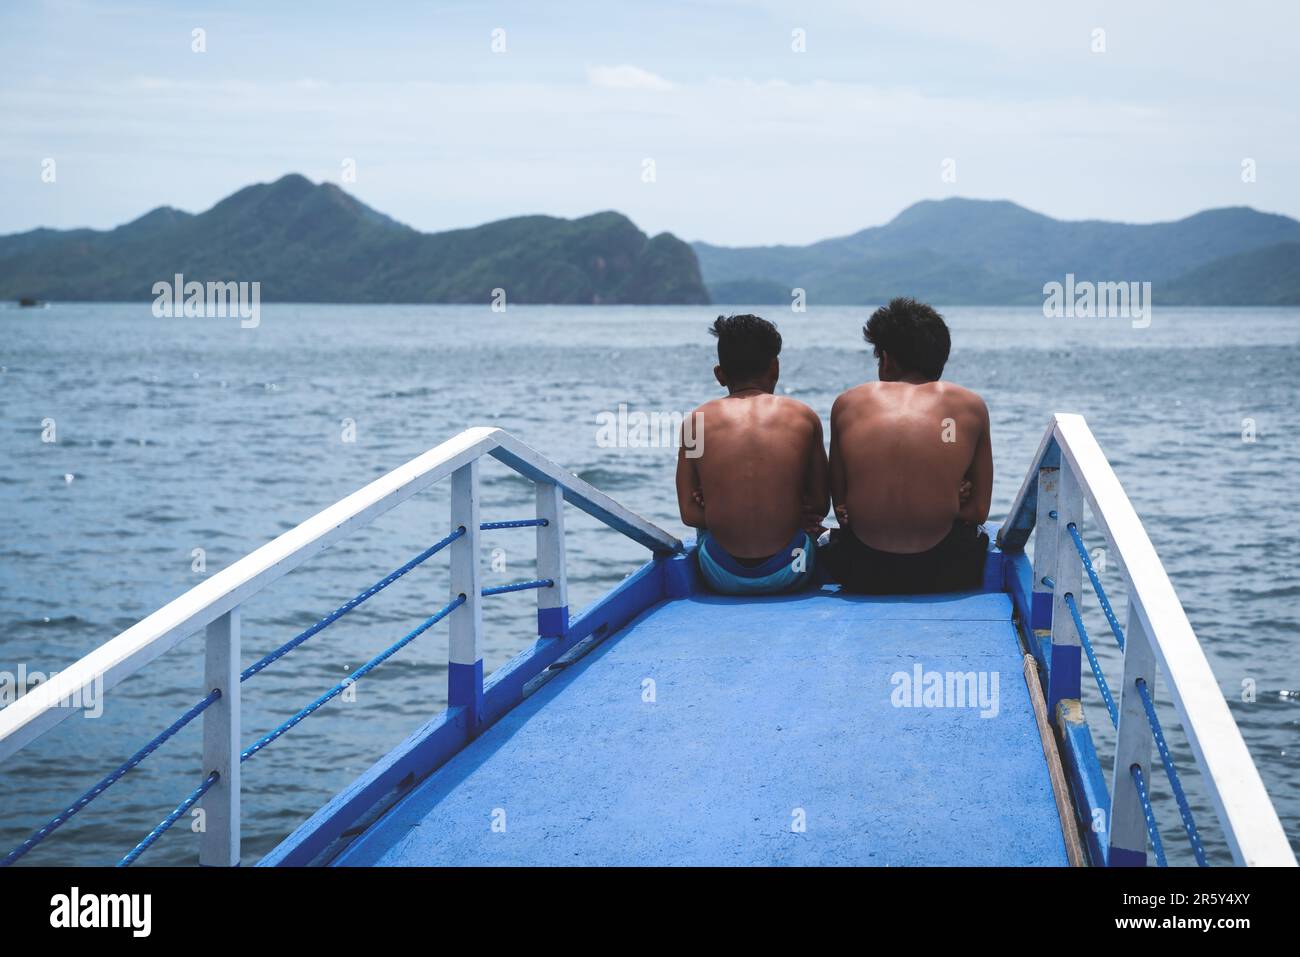 Palawan, Philippines - 28 February 2023: two men sitting at the bow of the boat to relax and enjoy the landscape Stock Photo